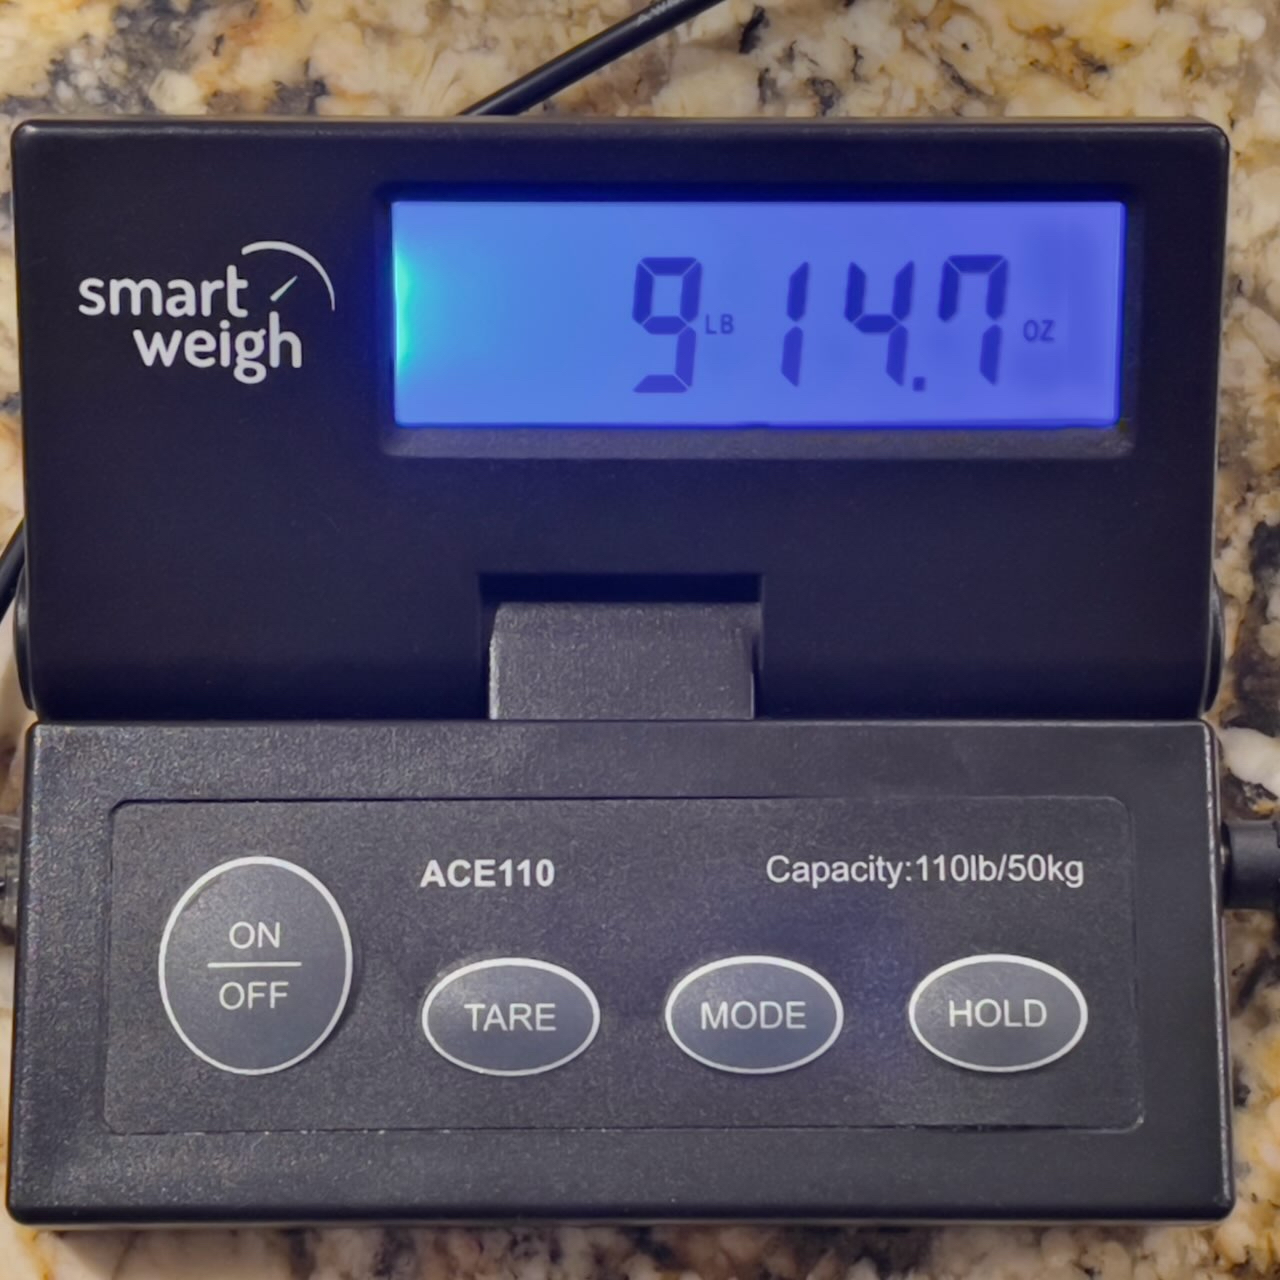 Smart Weigh ACE110 Digital Shipping Postal Scale - Black for sale online